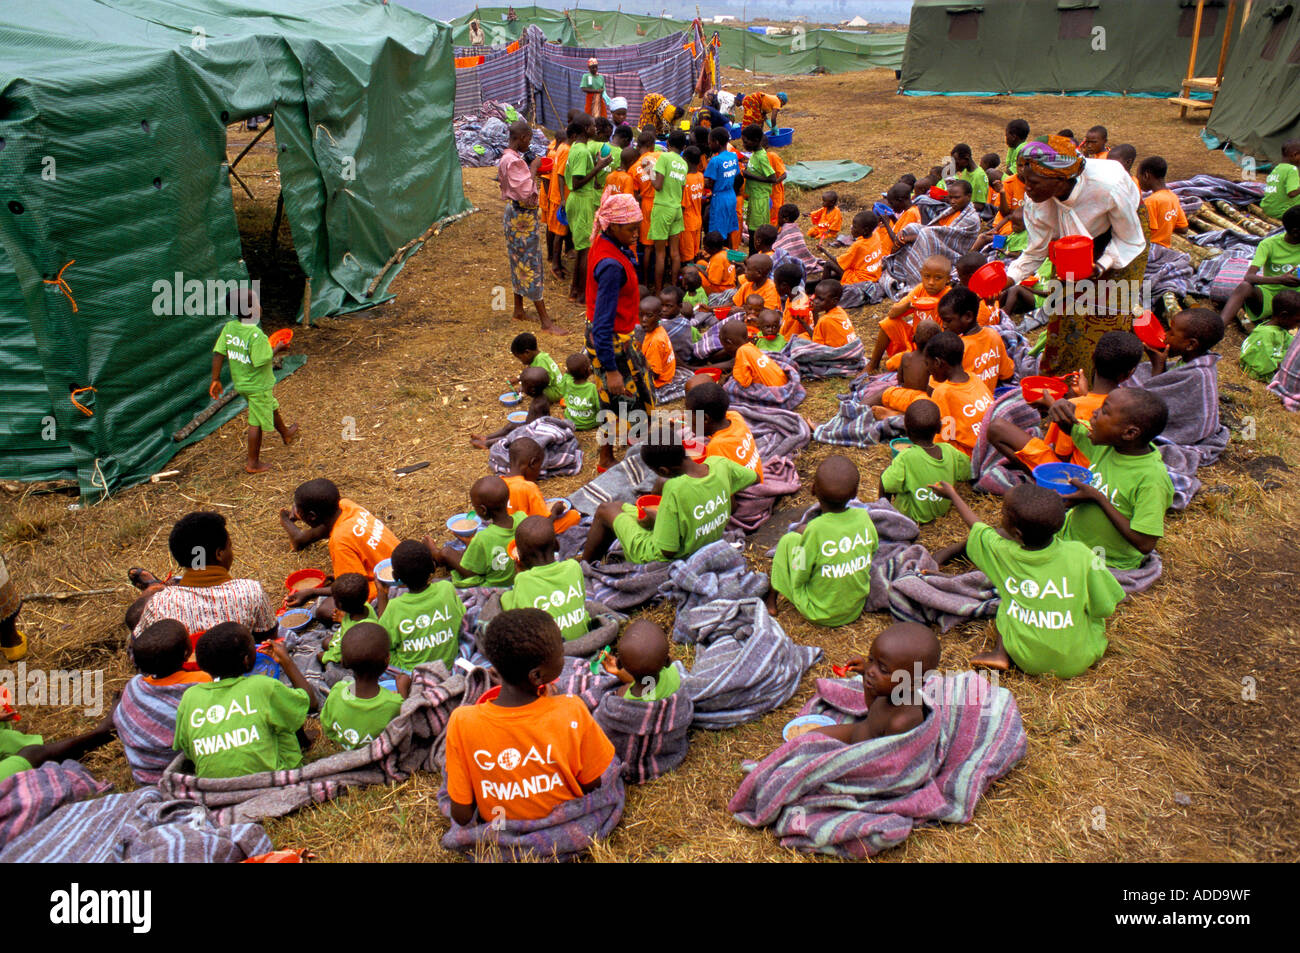 Kibumba orphanage Goma, DRC:  Young children in orange green Goal t-shirts having breakfast on the ground. Stock Photo